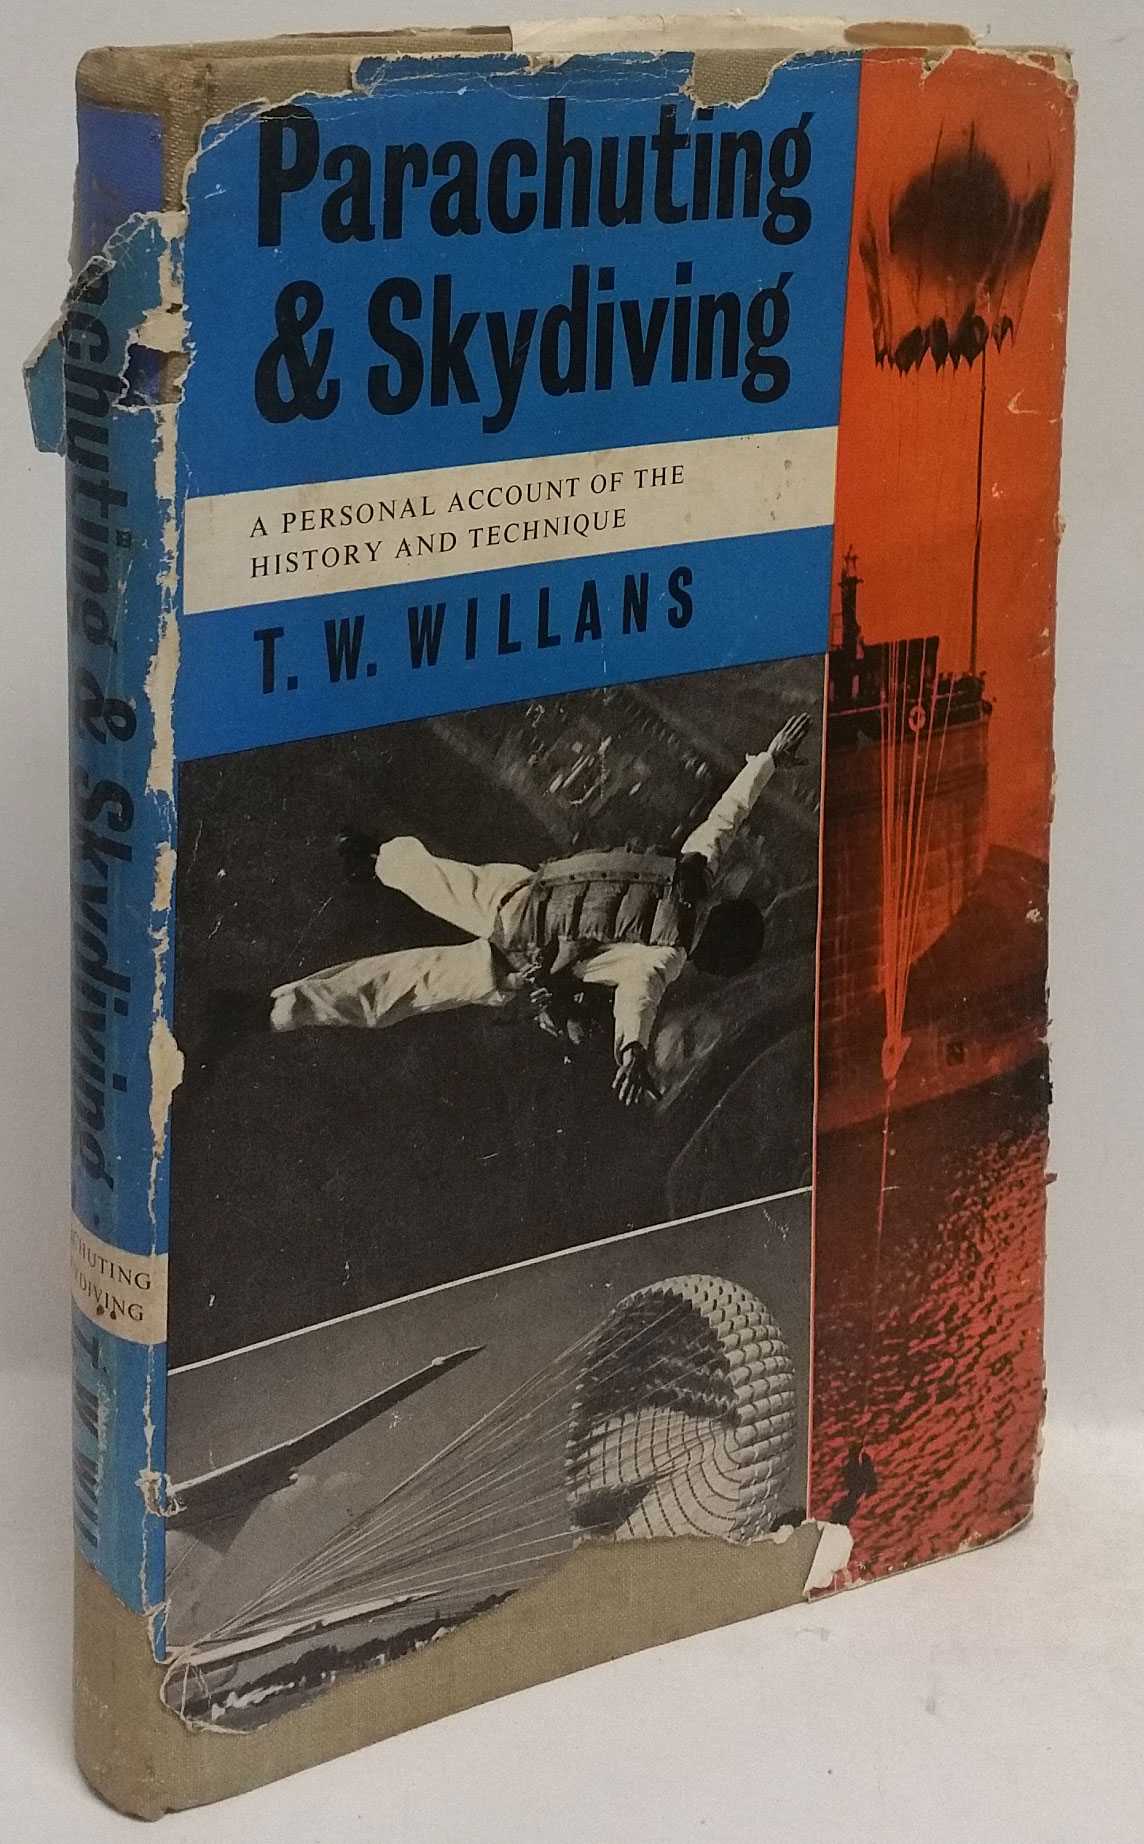 T. W. Willans - Parachuting & Skydiving: A Personal Account of the History and Technique